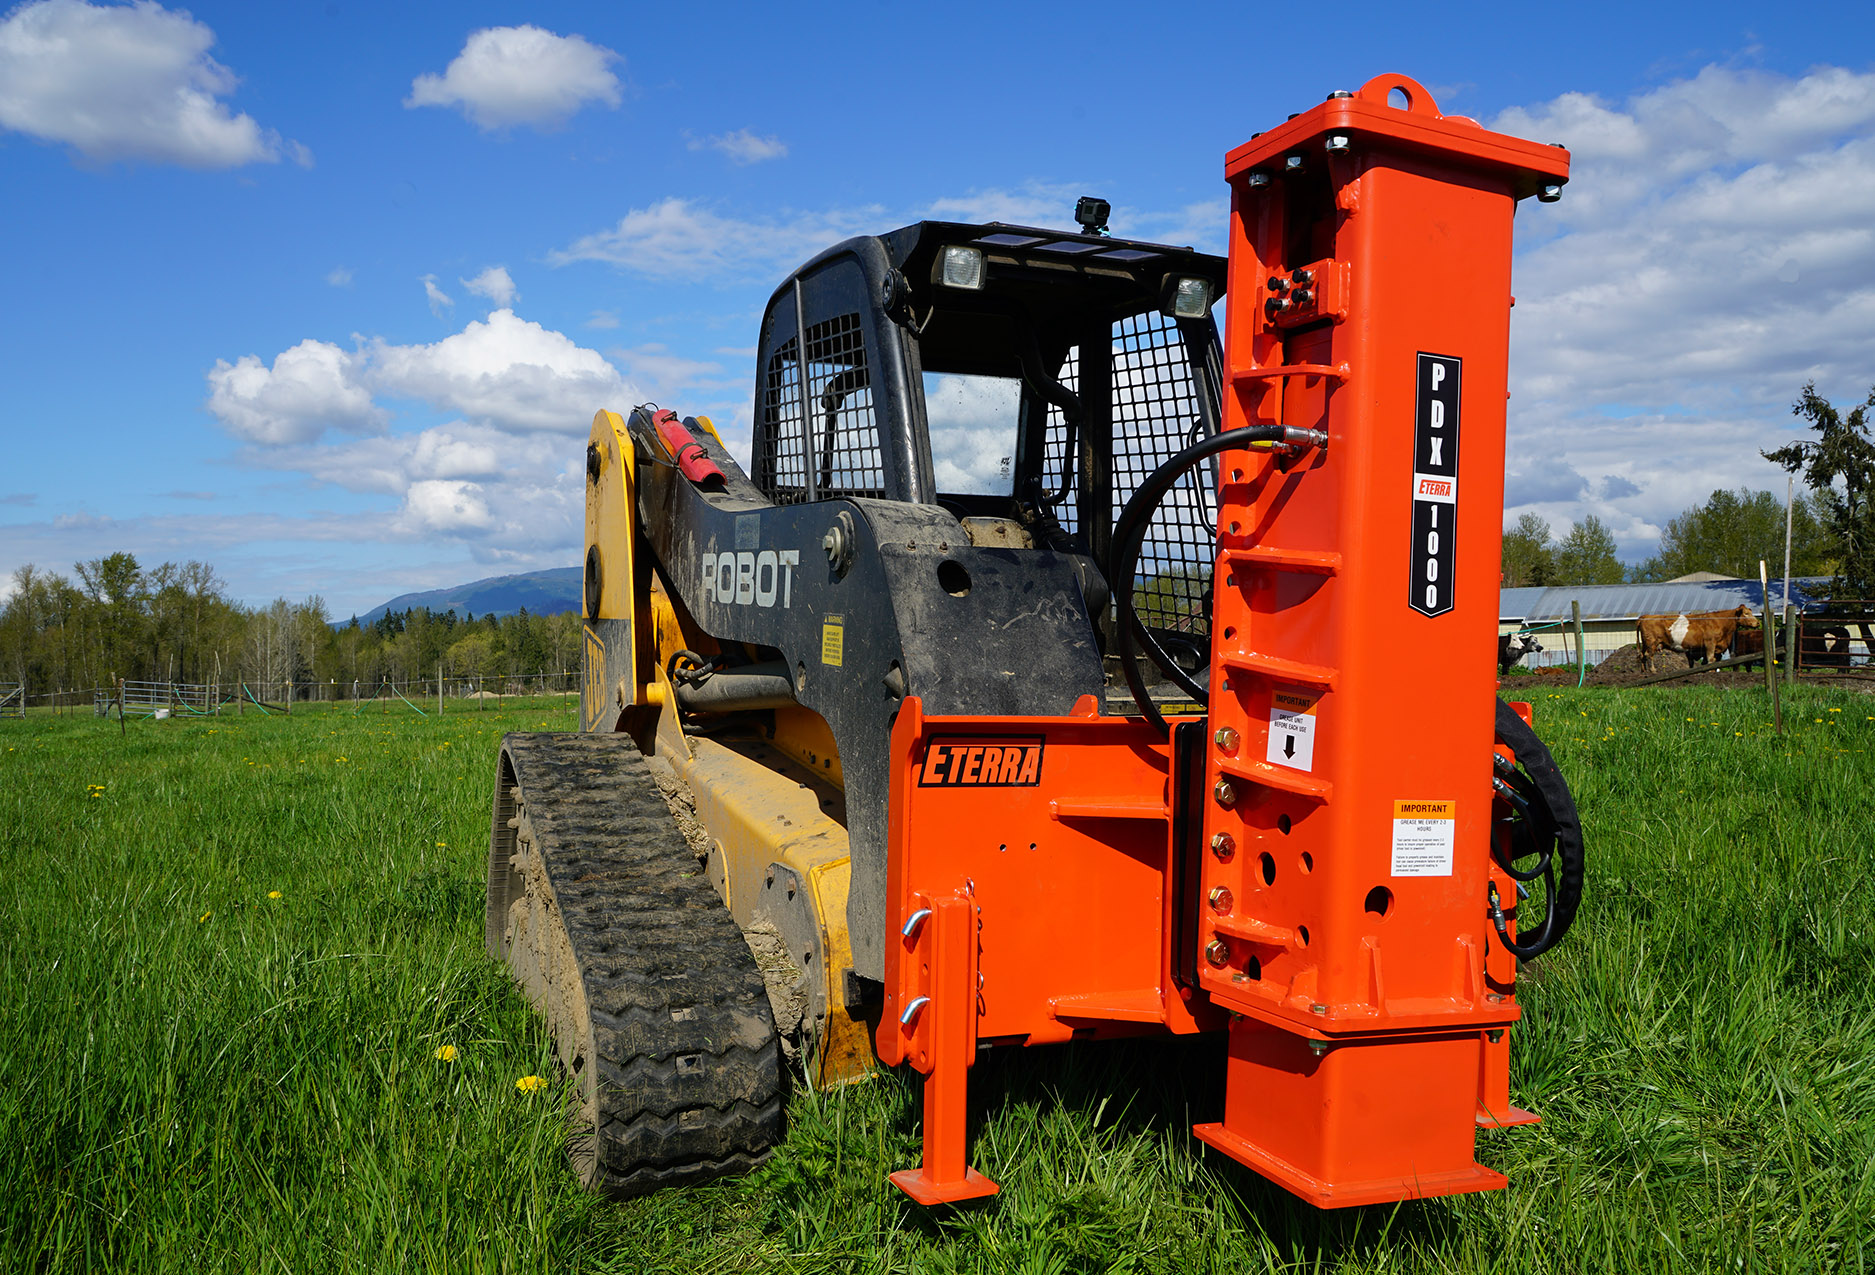 left angled view a skid steer parked on grass with an eterra pdx-1000 skid steer breaker style post driver attachment mounted on the front